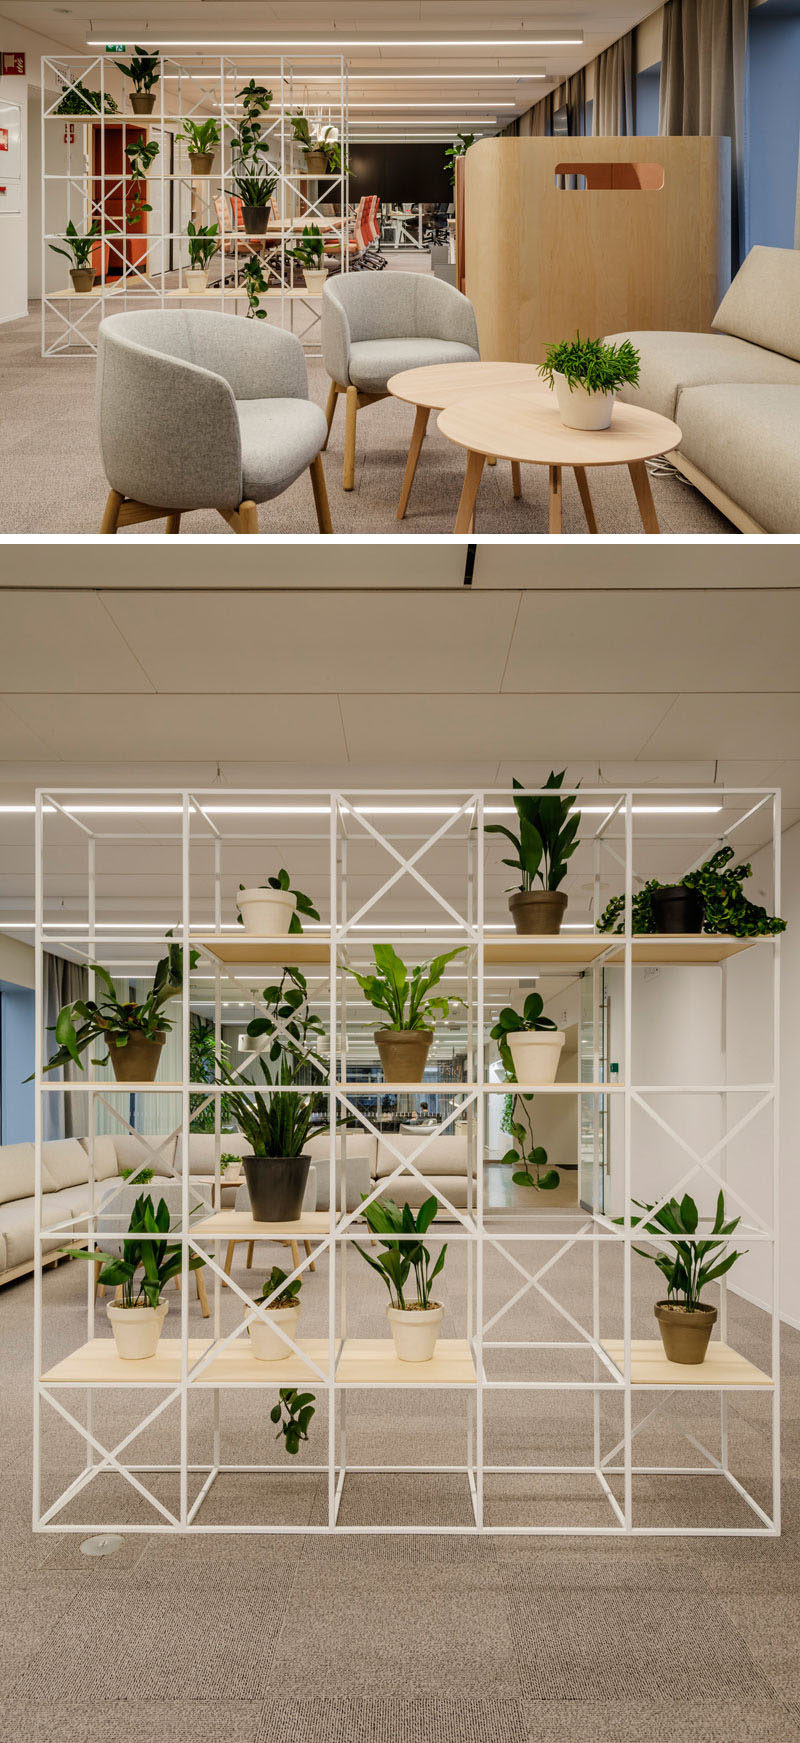 This modern office uses simple wire frame room dividers to define areas, and at the same time they allow people to see through to the other areas. #RoomDivider #OfficeDesign #Workplace